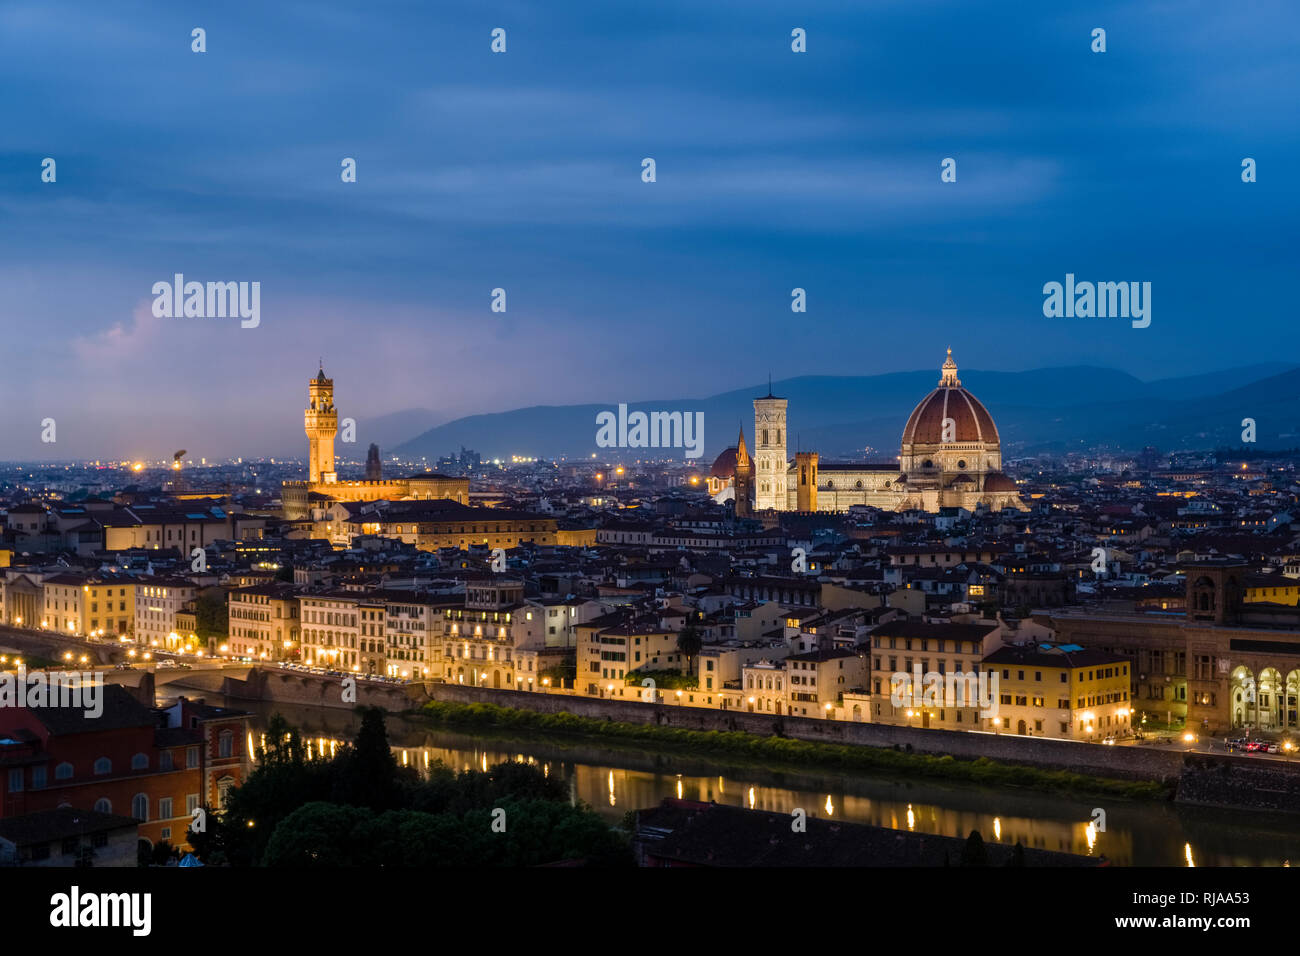 Aerial view on the illuminated town from Piazza Michelangelo at night, Duomo and Palazzo Vecchio standing out Stock Photo